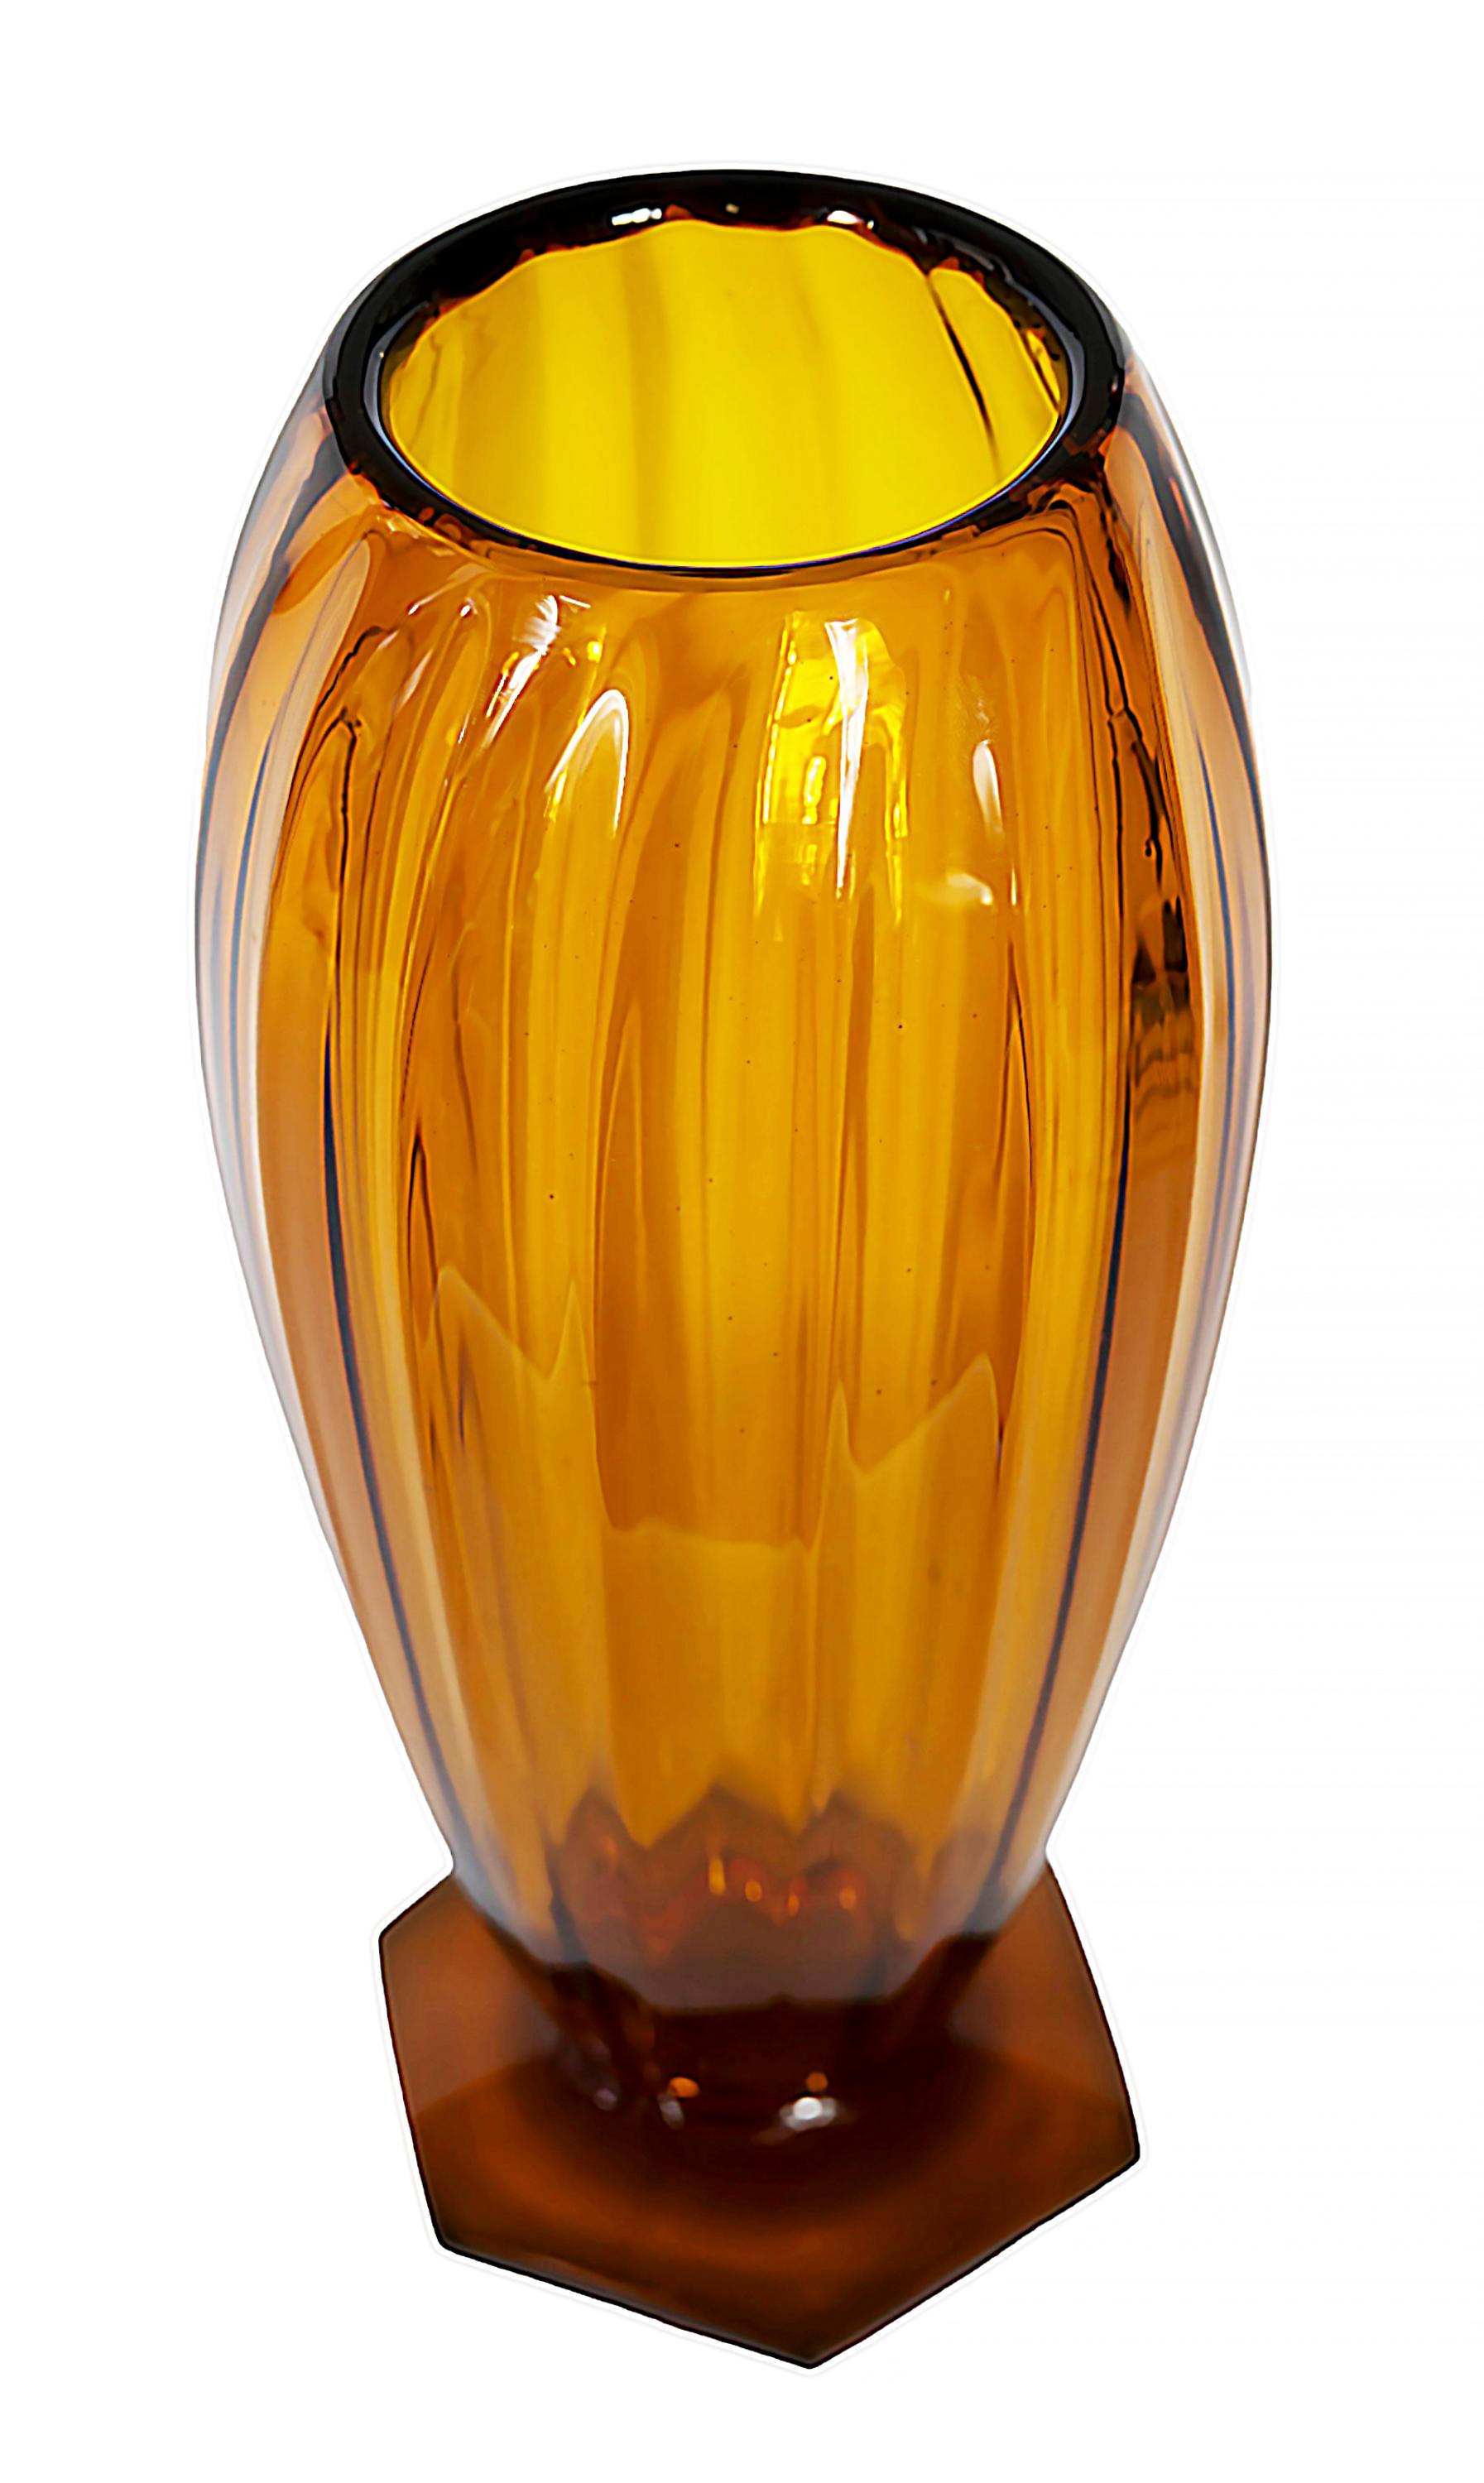 Vintage French vase by André DELATTE (1887-1953) in amber/orange glass, on hexagonal foot.
Signature engraved on the base.
